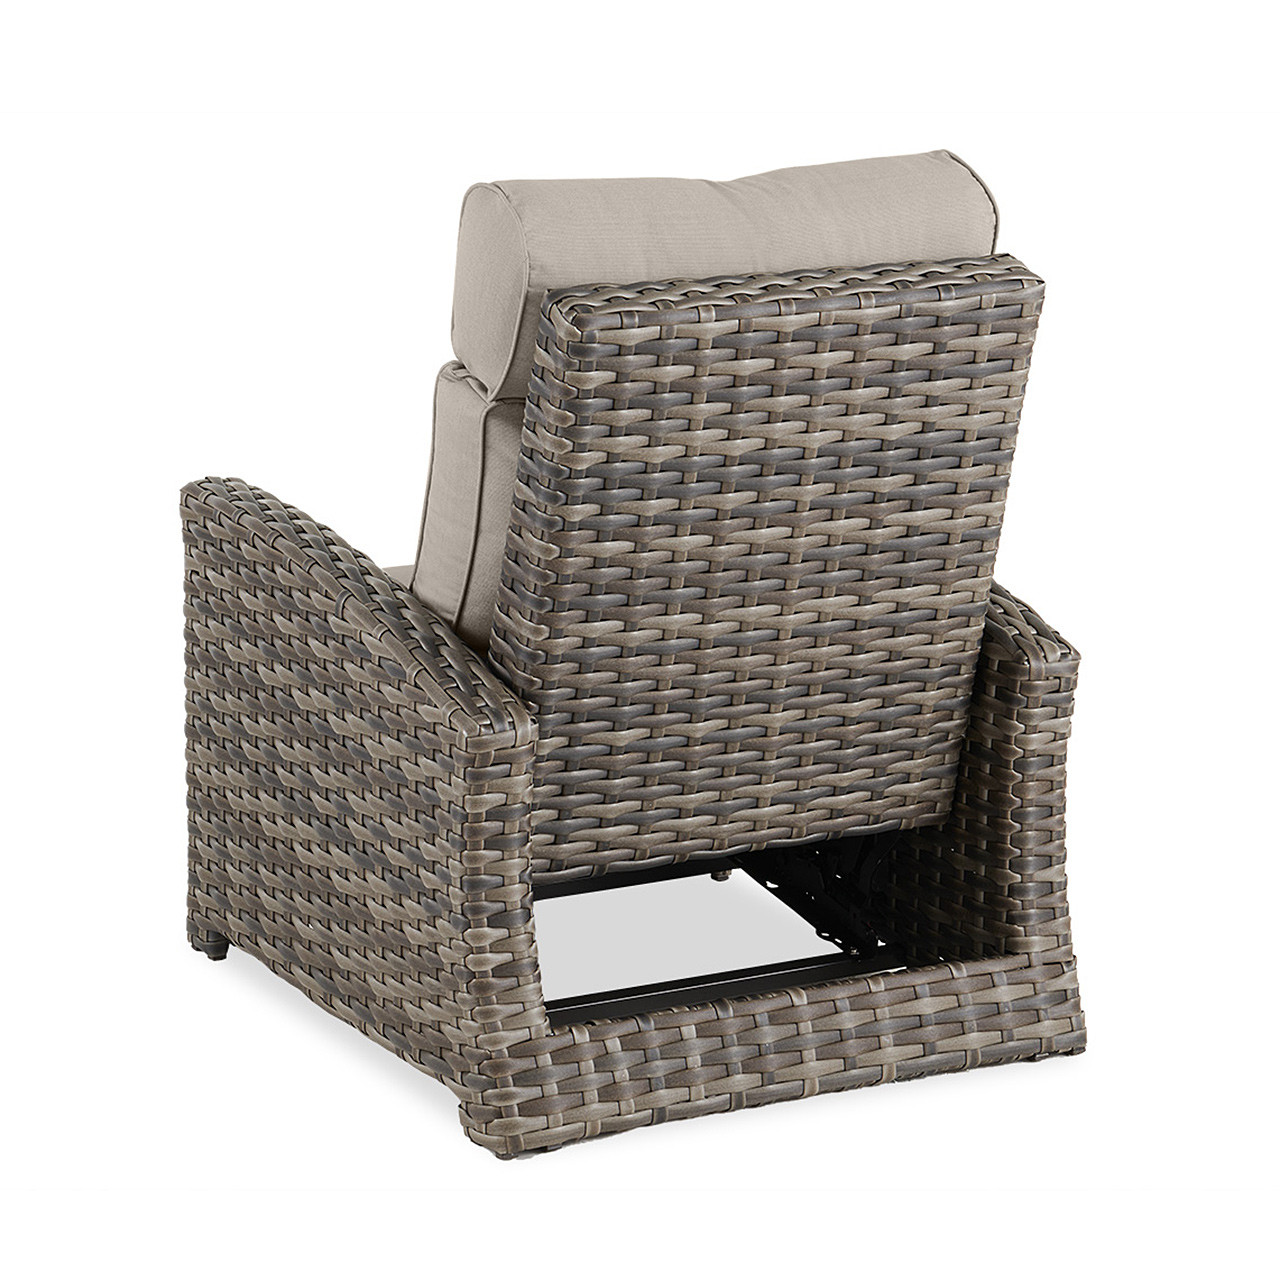 Contempo Husk Outdoor Wicker with Cushions Recliner Club Chair